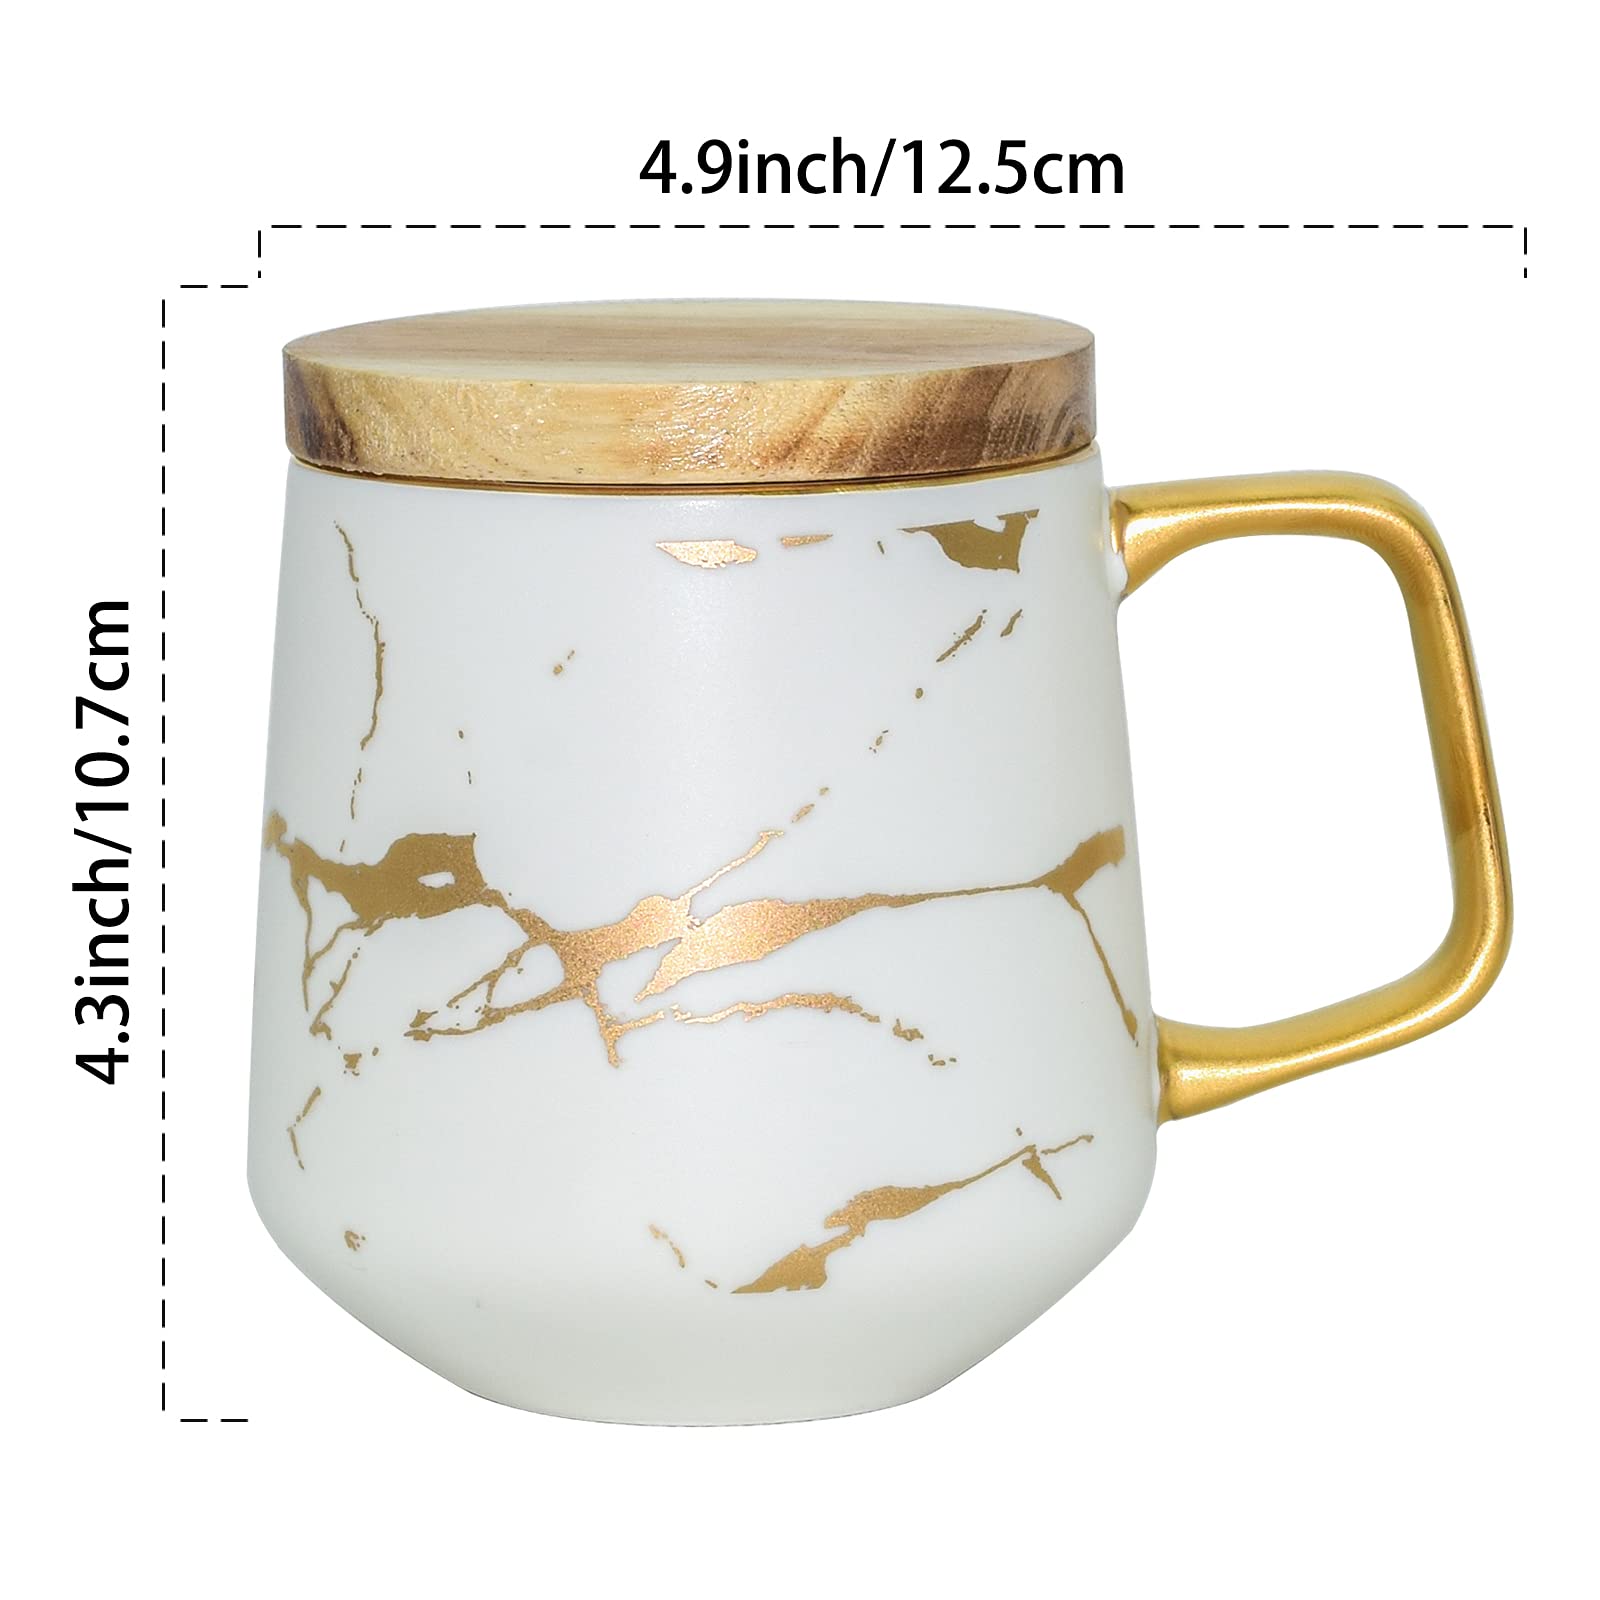 LUCCK Ceramic Coffee Mug with Wooden Lid 14.5 OZ Tea Cup Luxury Gold Inlay Marble Pattern Ceramic Mug Coffee Tea Mug Gift for Women Wife Girl Grandma (White),1 Count (Pack of 1)